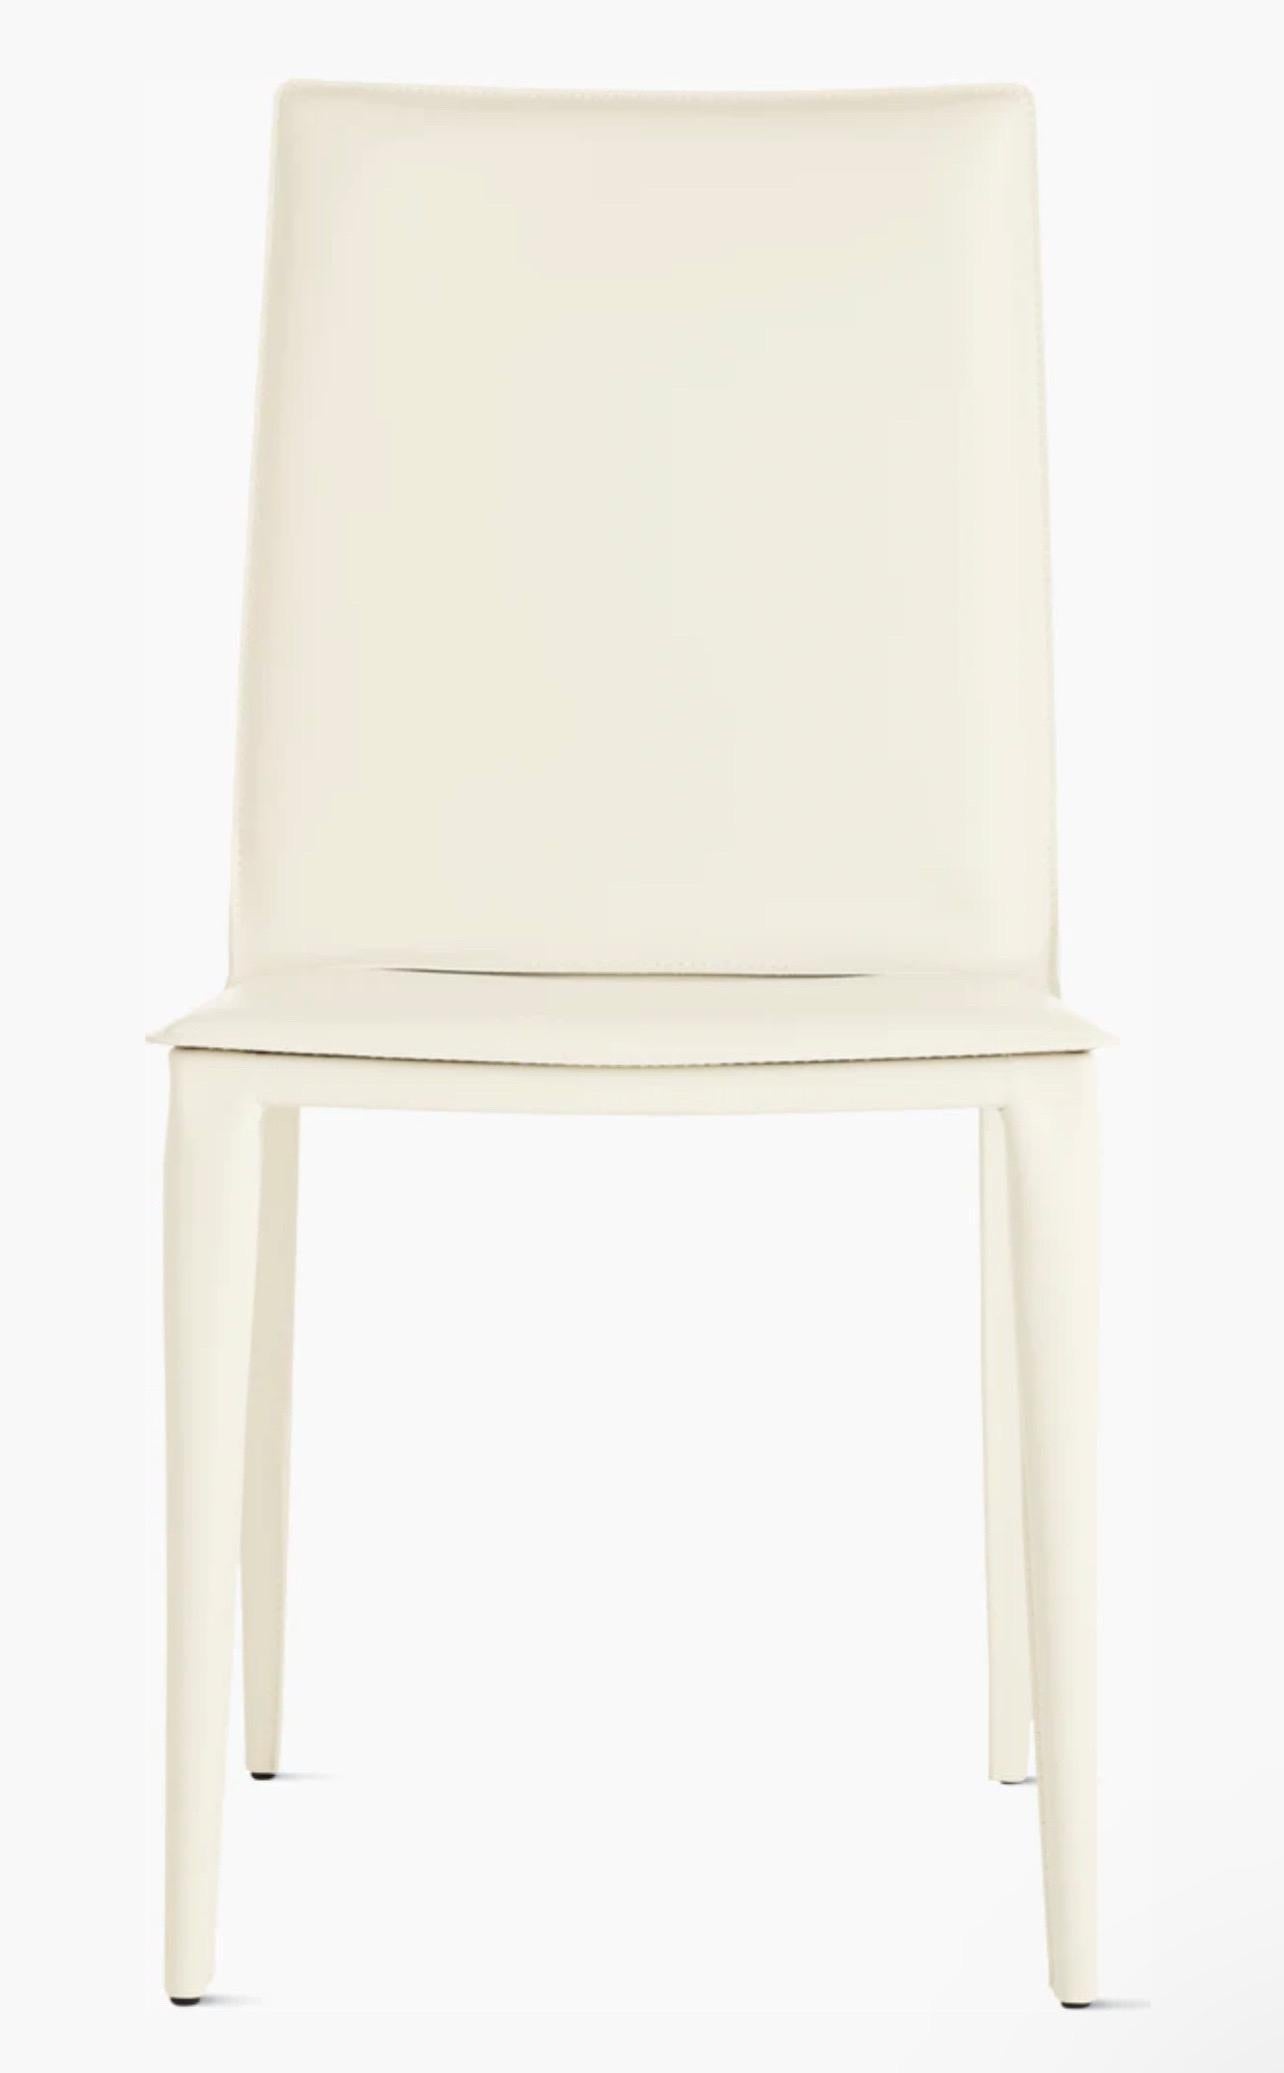 Post-Modern Postmodern Set of 4 Chairs in White Leather Bottega by Frag, Italy